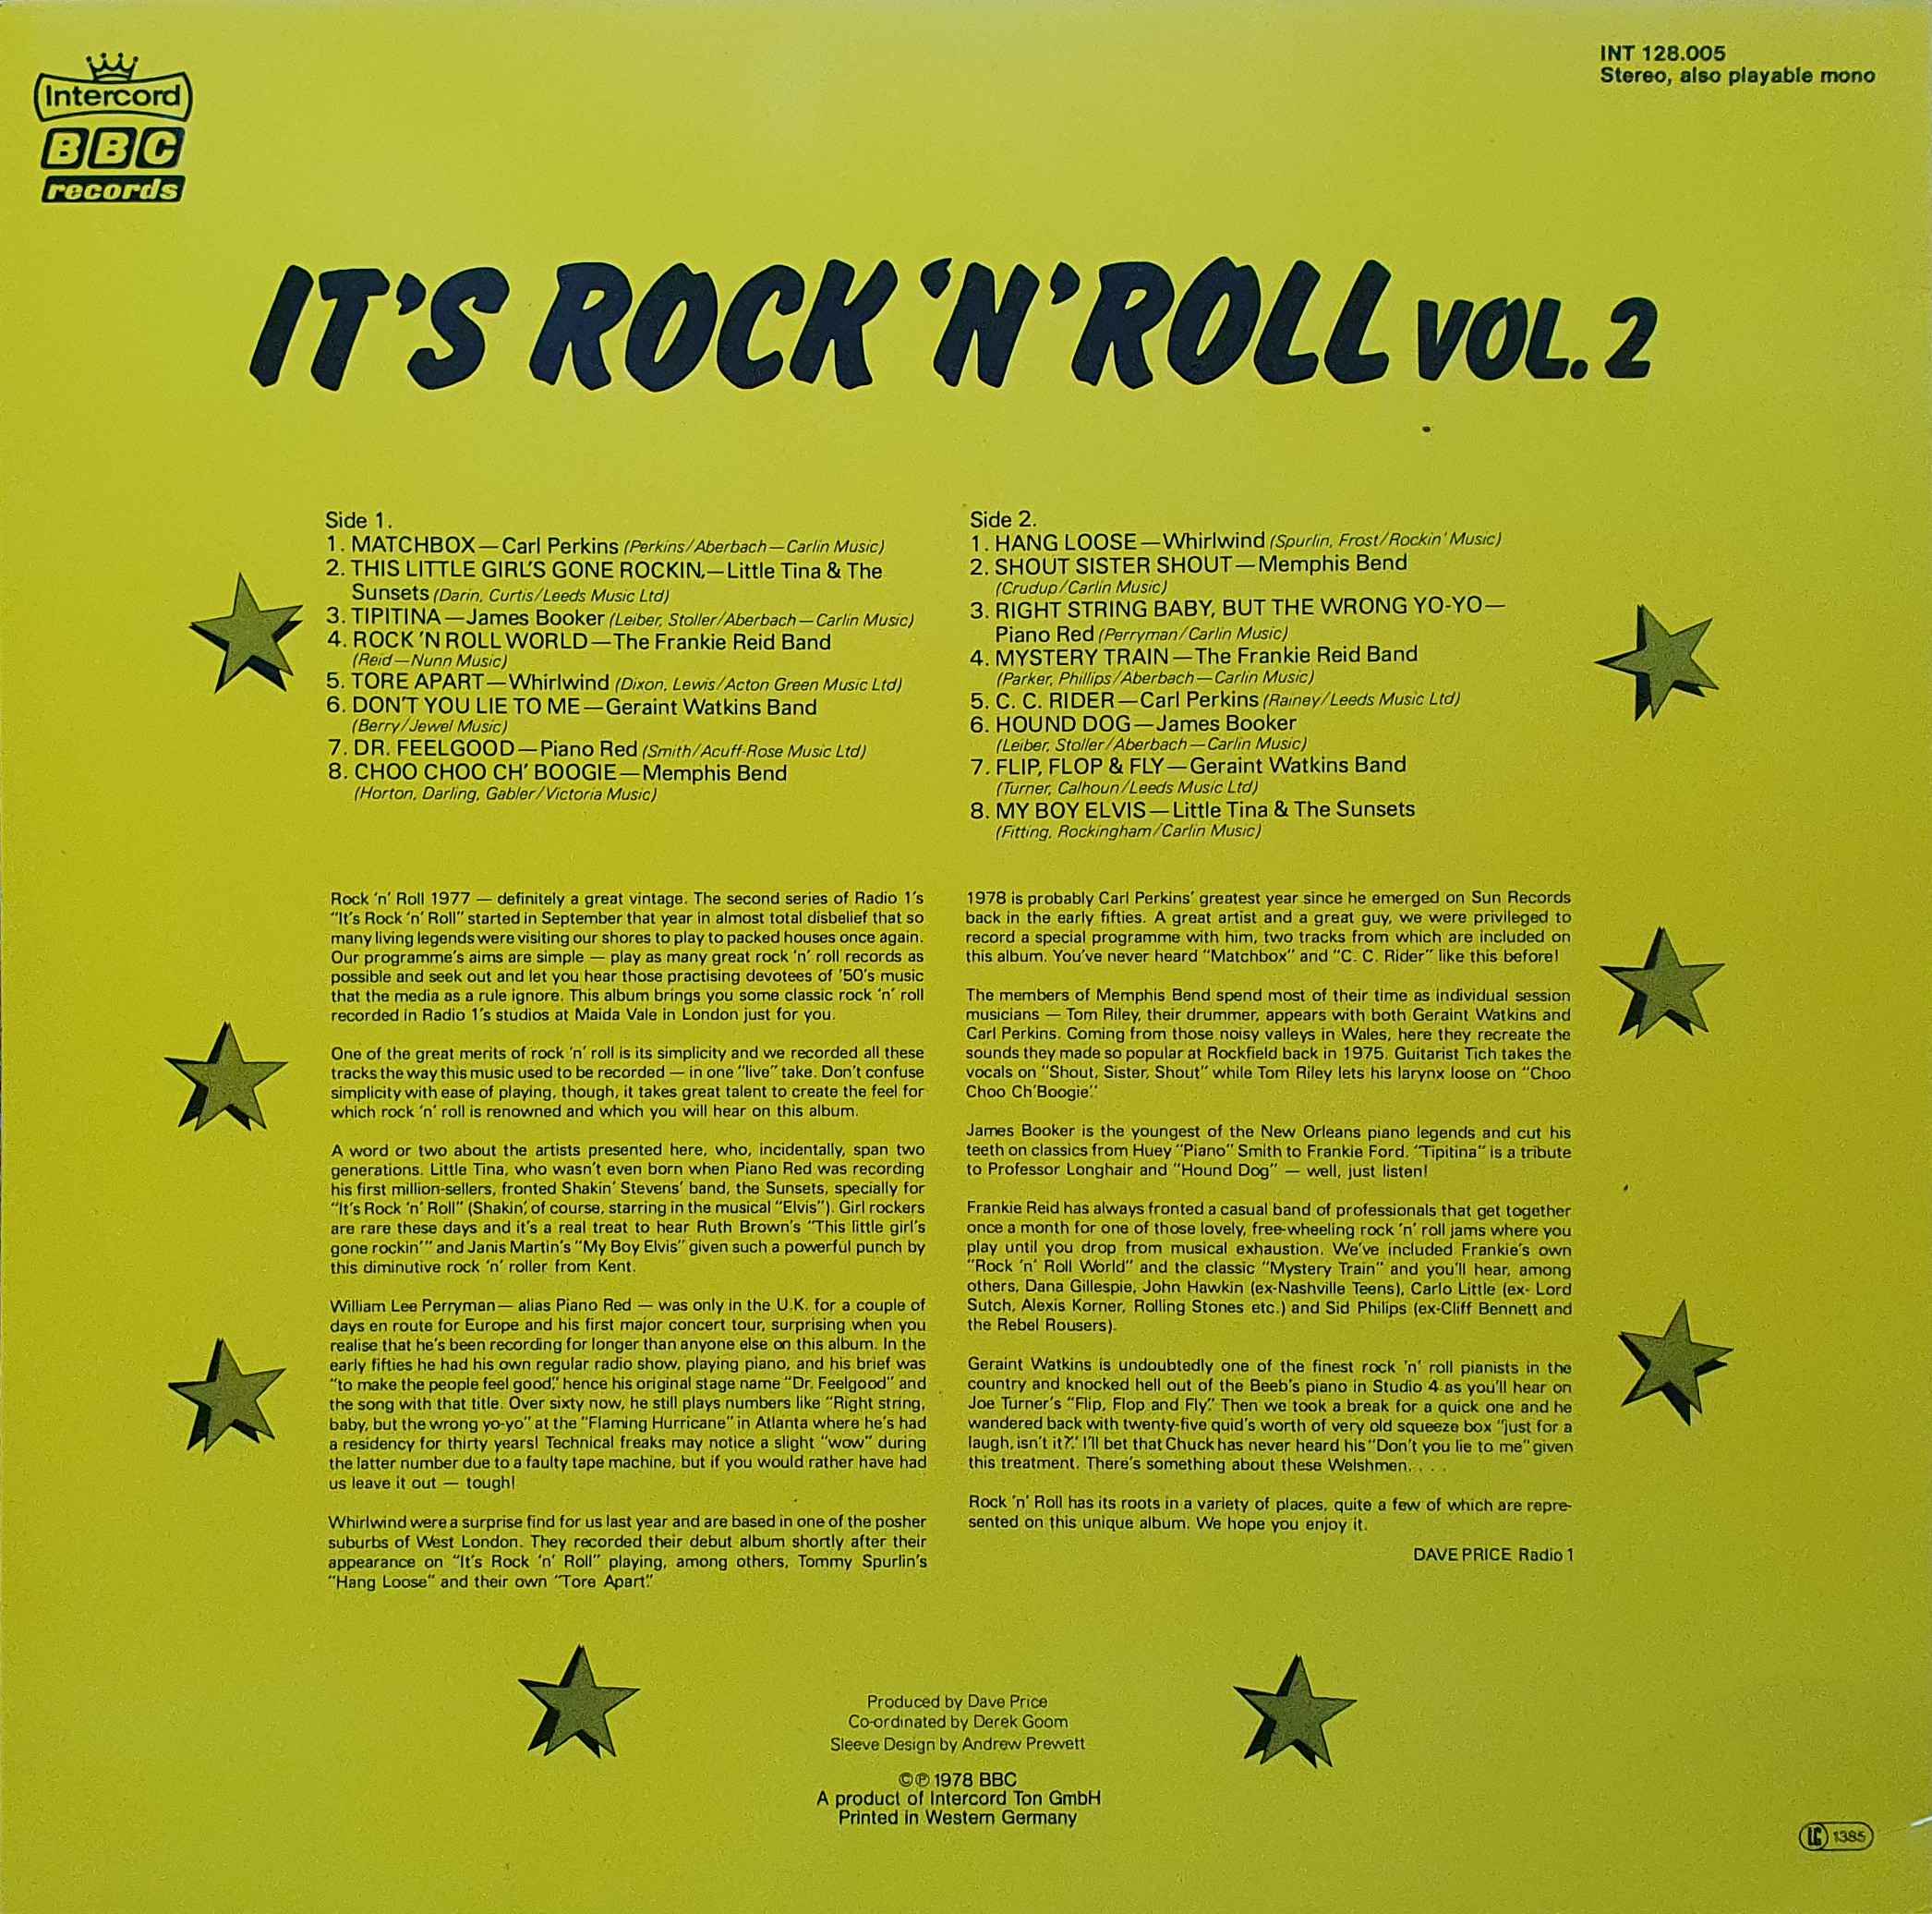 Picture of INT 128.005 It's rock 'N' roll - Volume 2 by artist Various from the BBC records and Tapes library